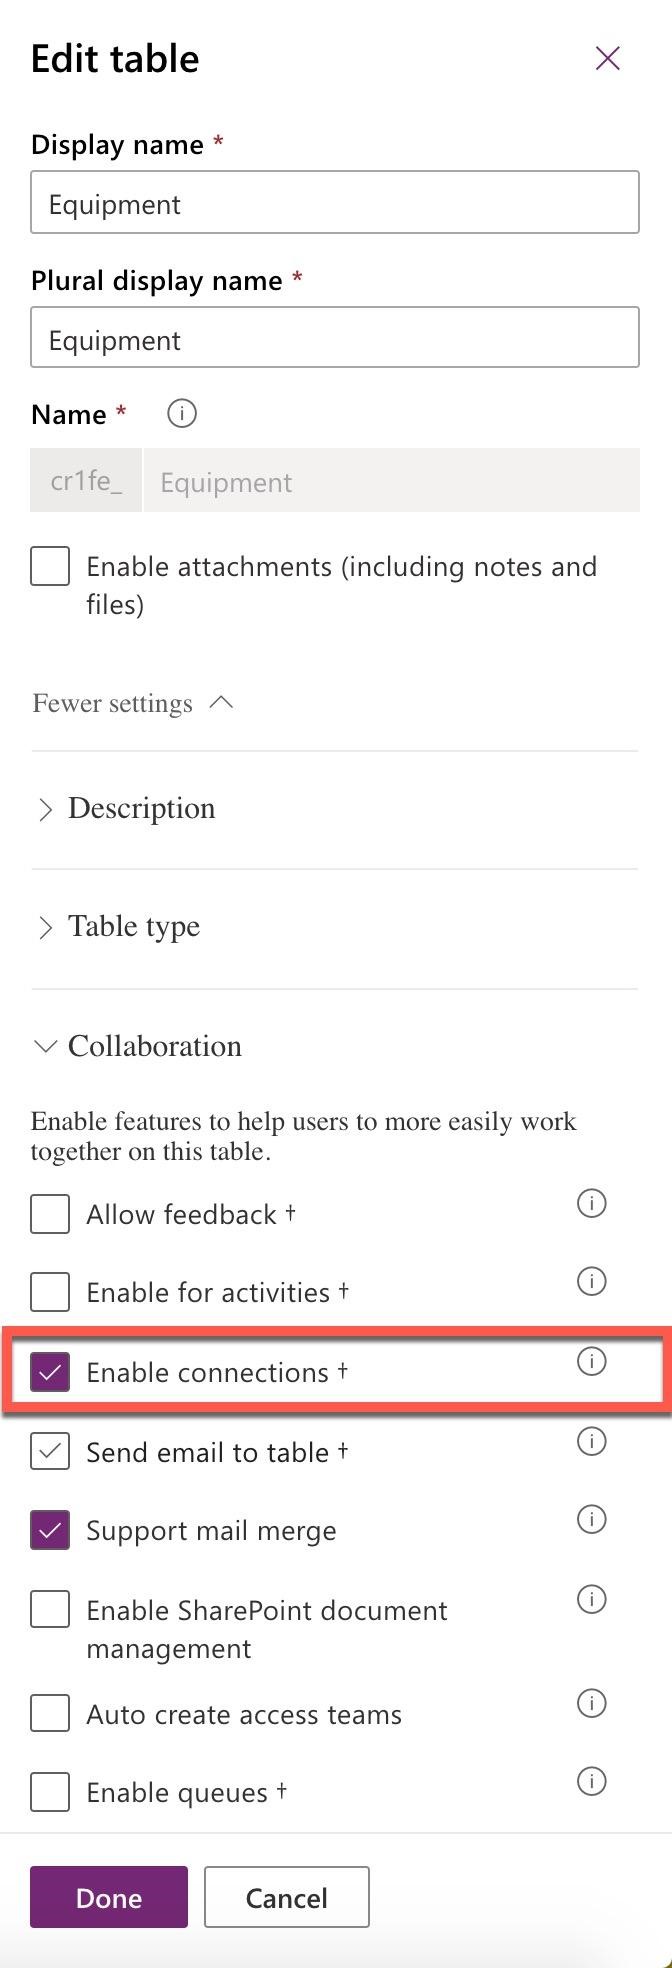 Edit table x

Display name *

| Equipment |

Plural display name *

| Equipment

Name* @

crife_ Equipment

Enable attachments (including notes and
files)

Fewer settings “~

> Description

> Table type

Y Collaboration

Enable features to help users to more easily work
together on this table.

Allow feedback t+

Se ©

Enable for activities +

Enable connections +

Y]} Send email to table +

iS)

Support mail merge

Enable SharePoint document
management

Auto create access teams

oO 8 28 O

Enable queues t+